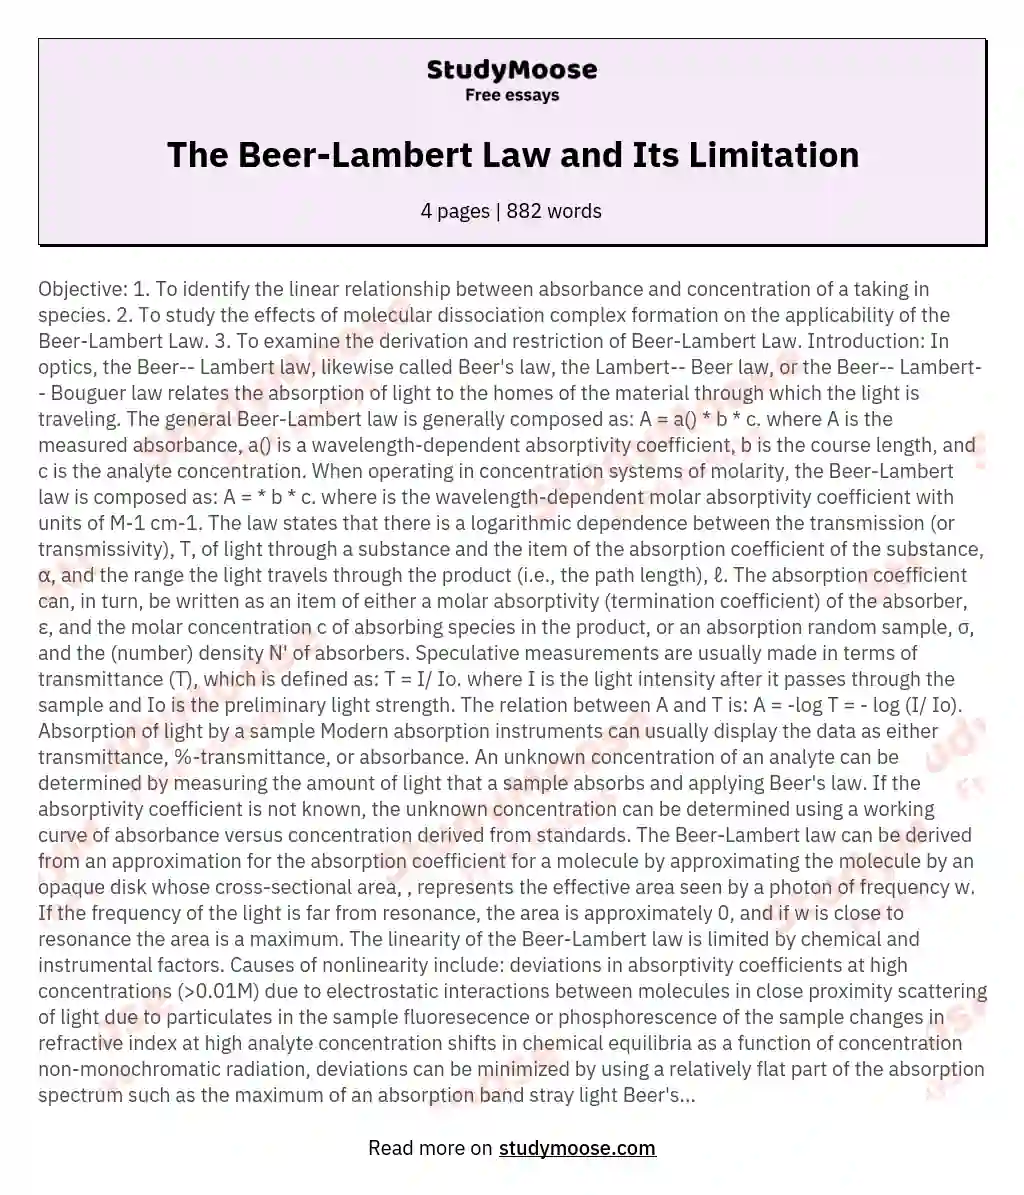 The Beer-Lambert Law and Its Limitation essay